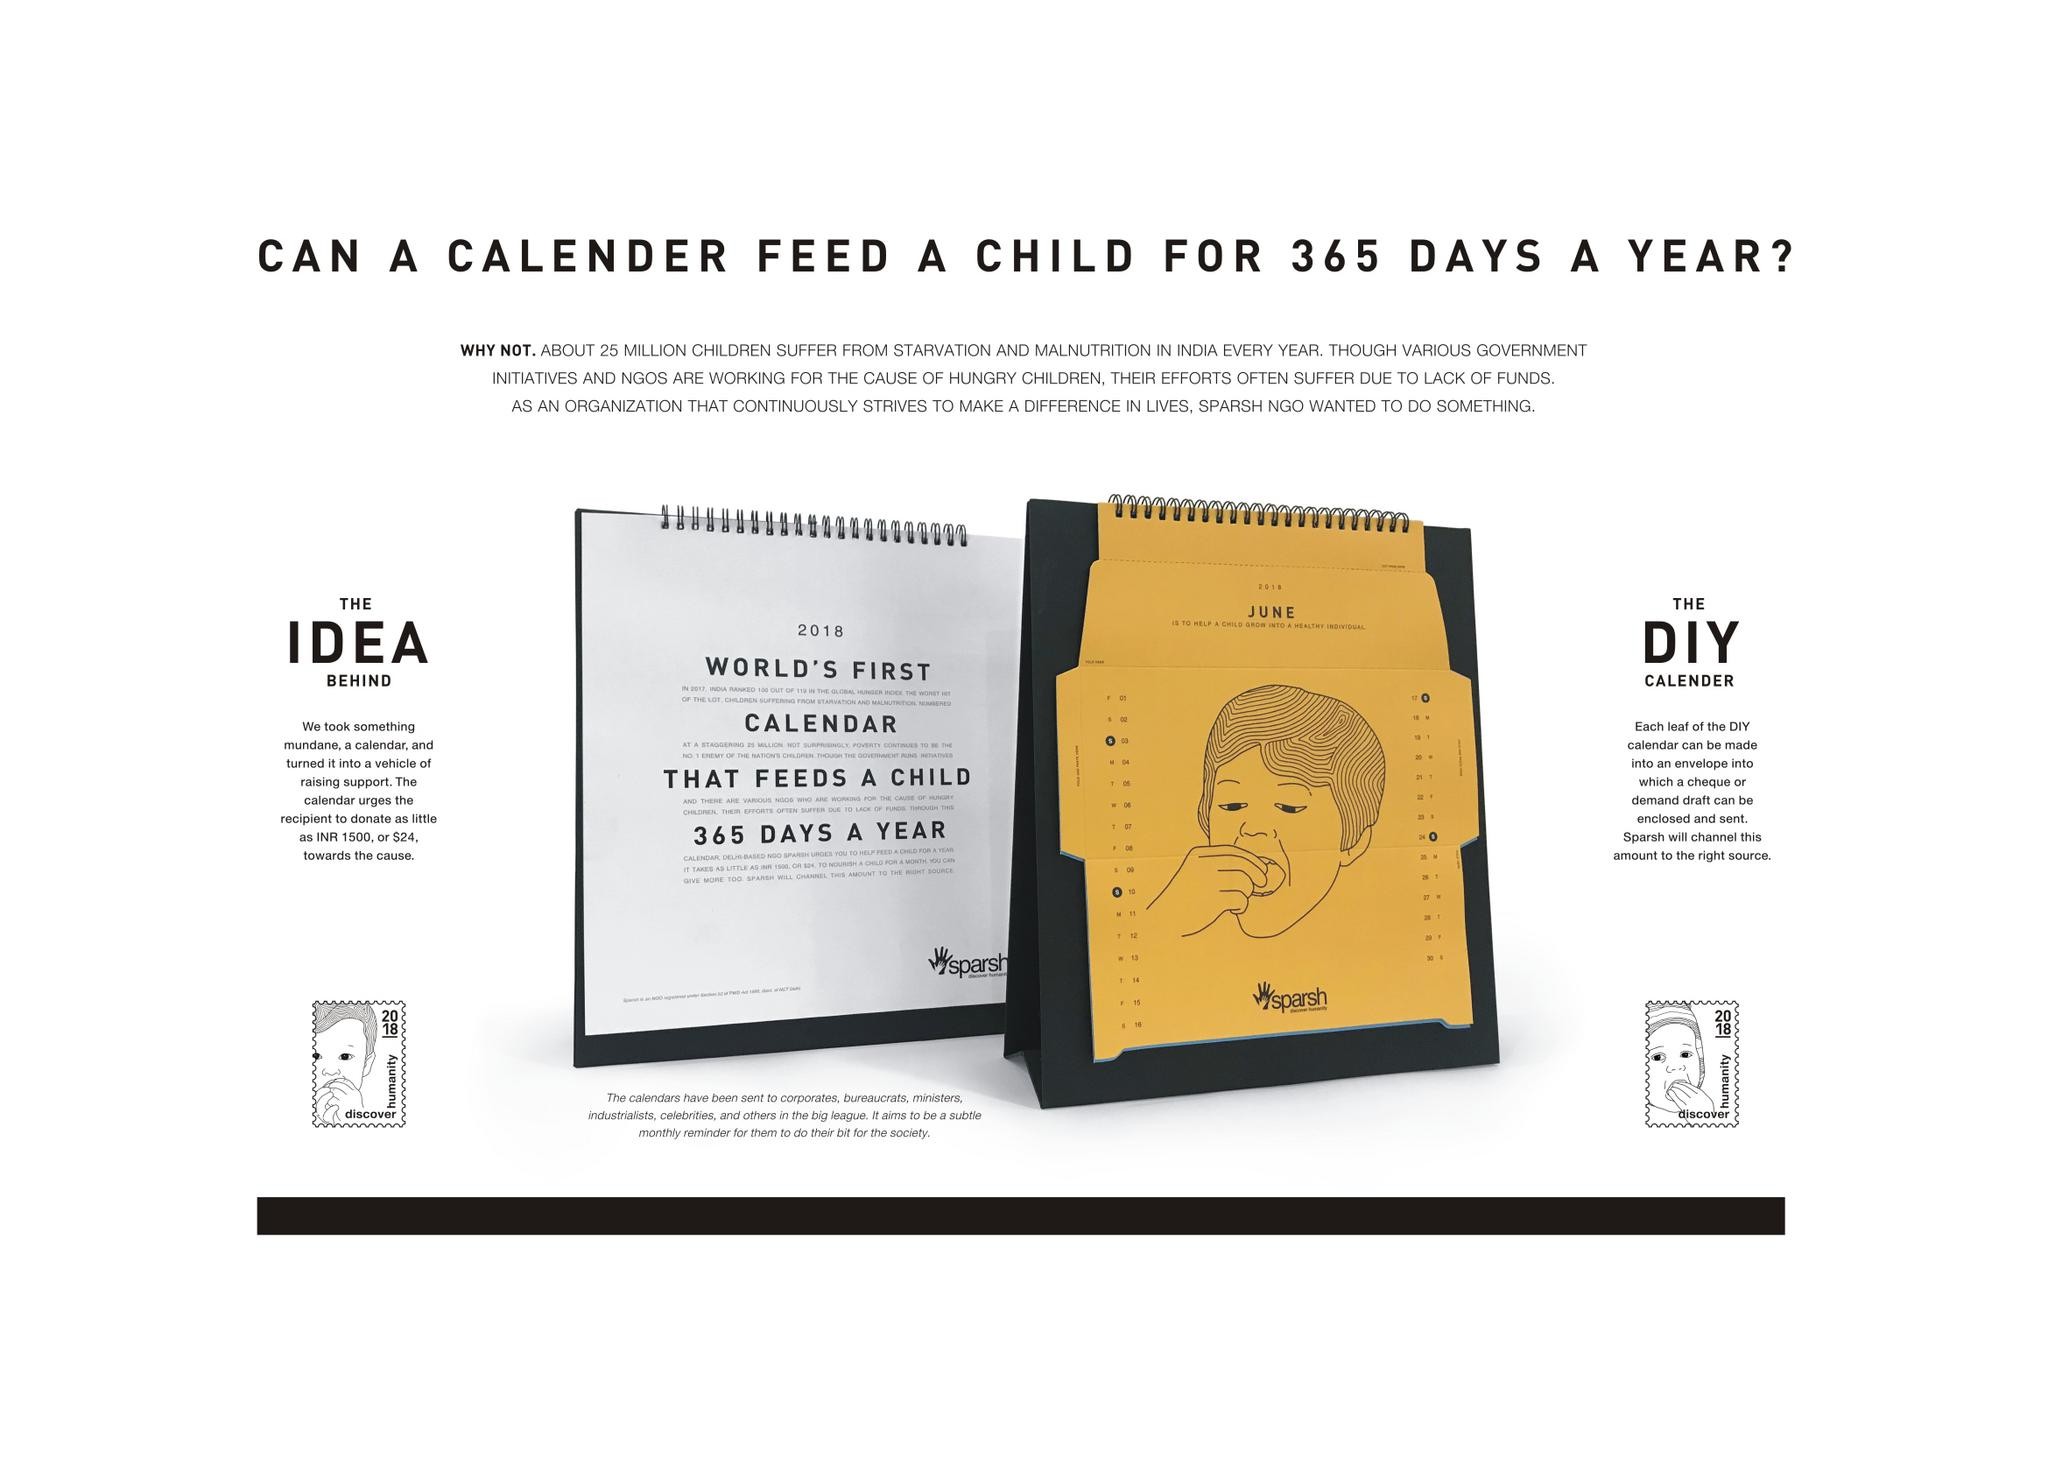 FEED A CHILD FOR 365 DAYS A YEAR